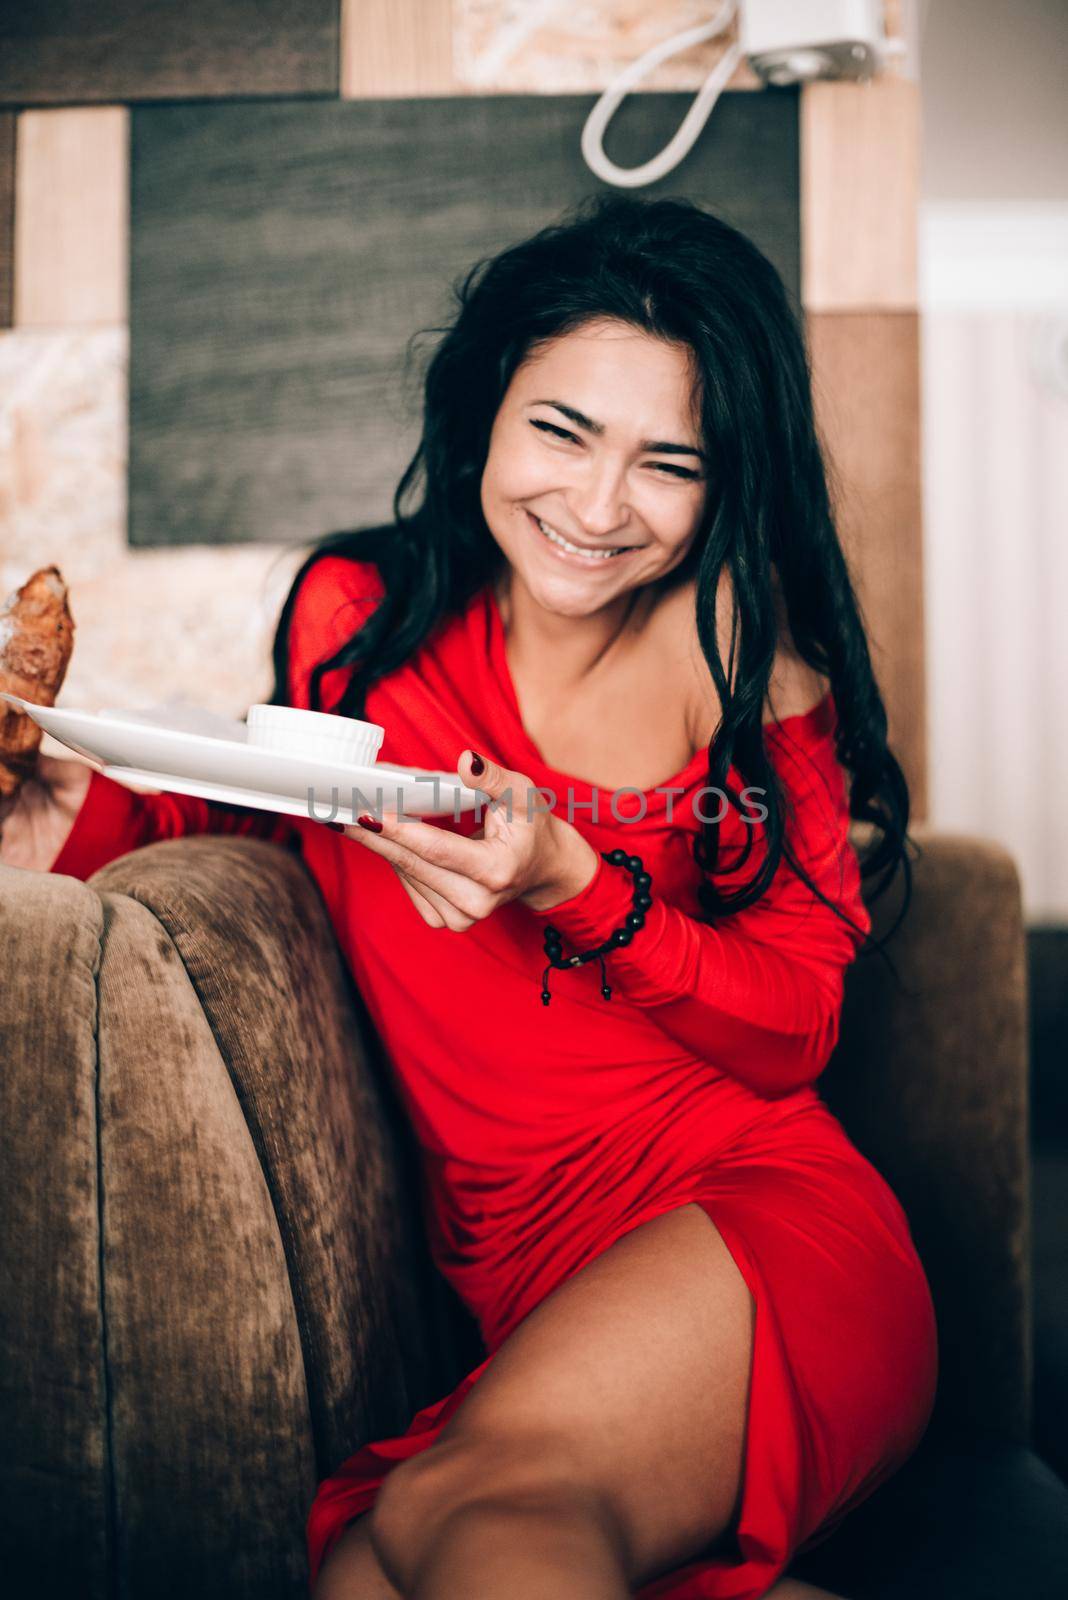 sexy woman in a red dress with black hair eats a croissant. temptation with food. attractive legs. obsession with red. Selective focus, film grain by Ashtray25